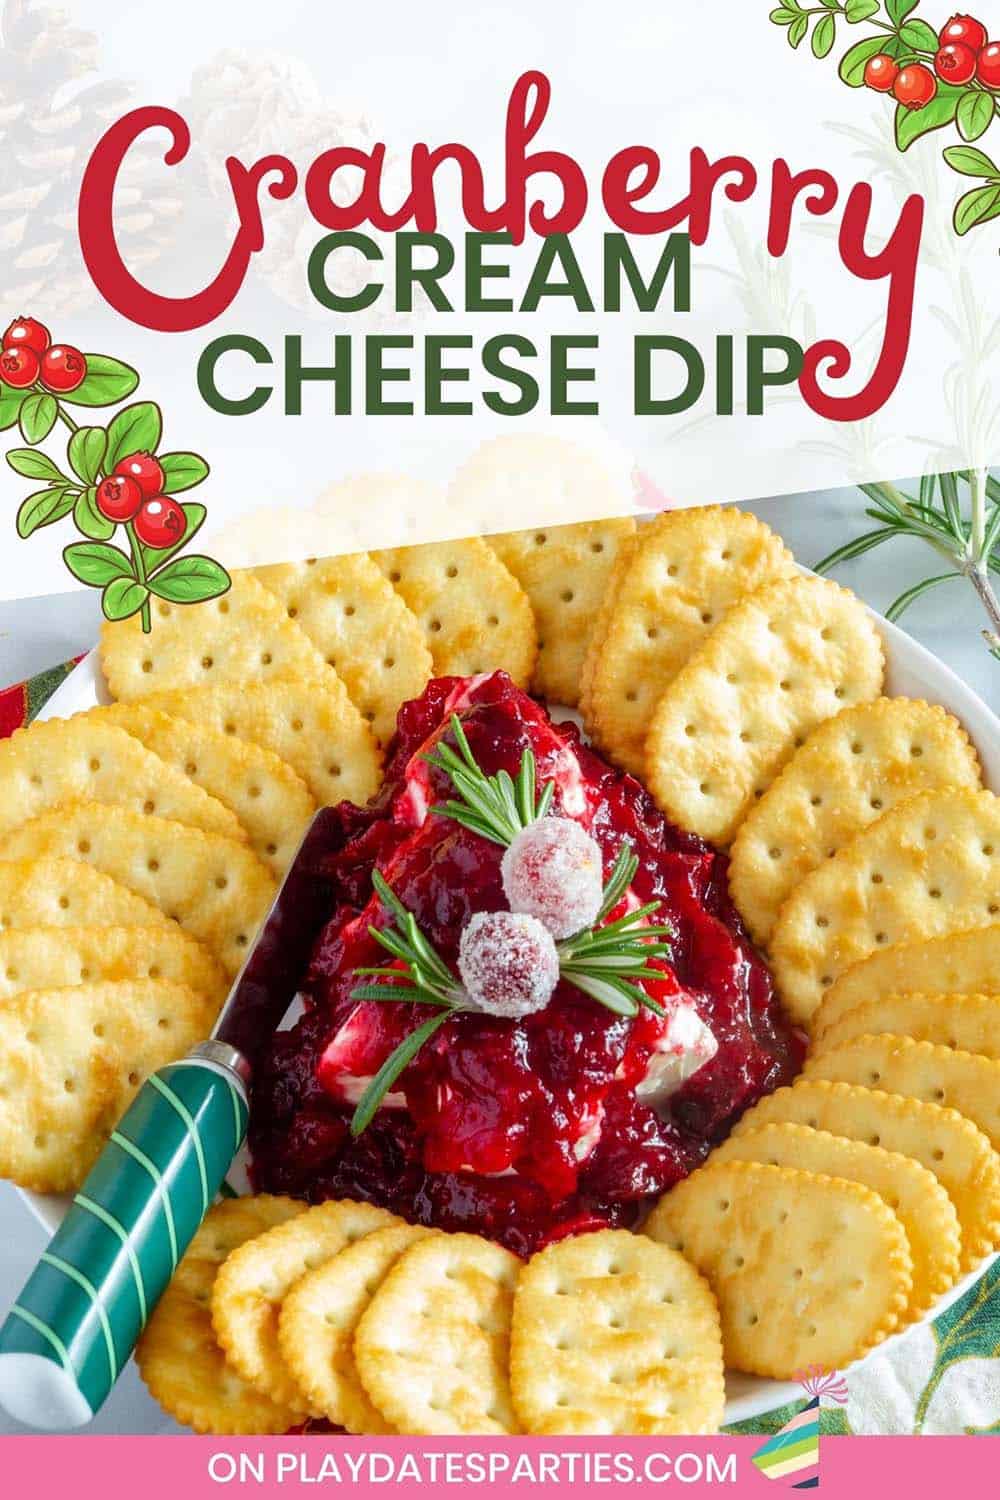 Cranberry cream cheese dip garnished with rosemary and candied cranberries, and surrounded by butter crackers.